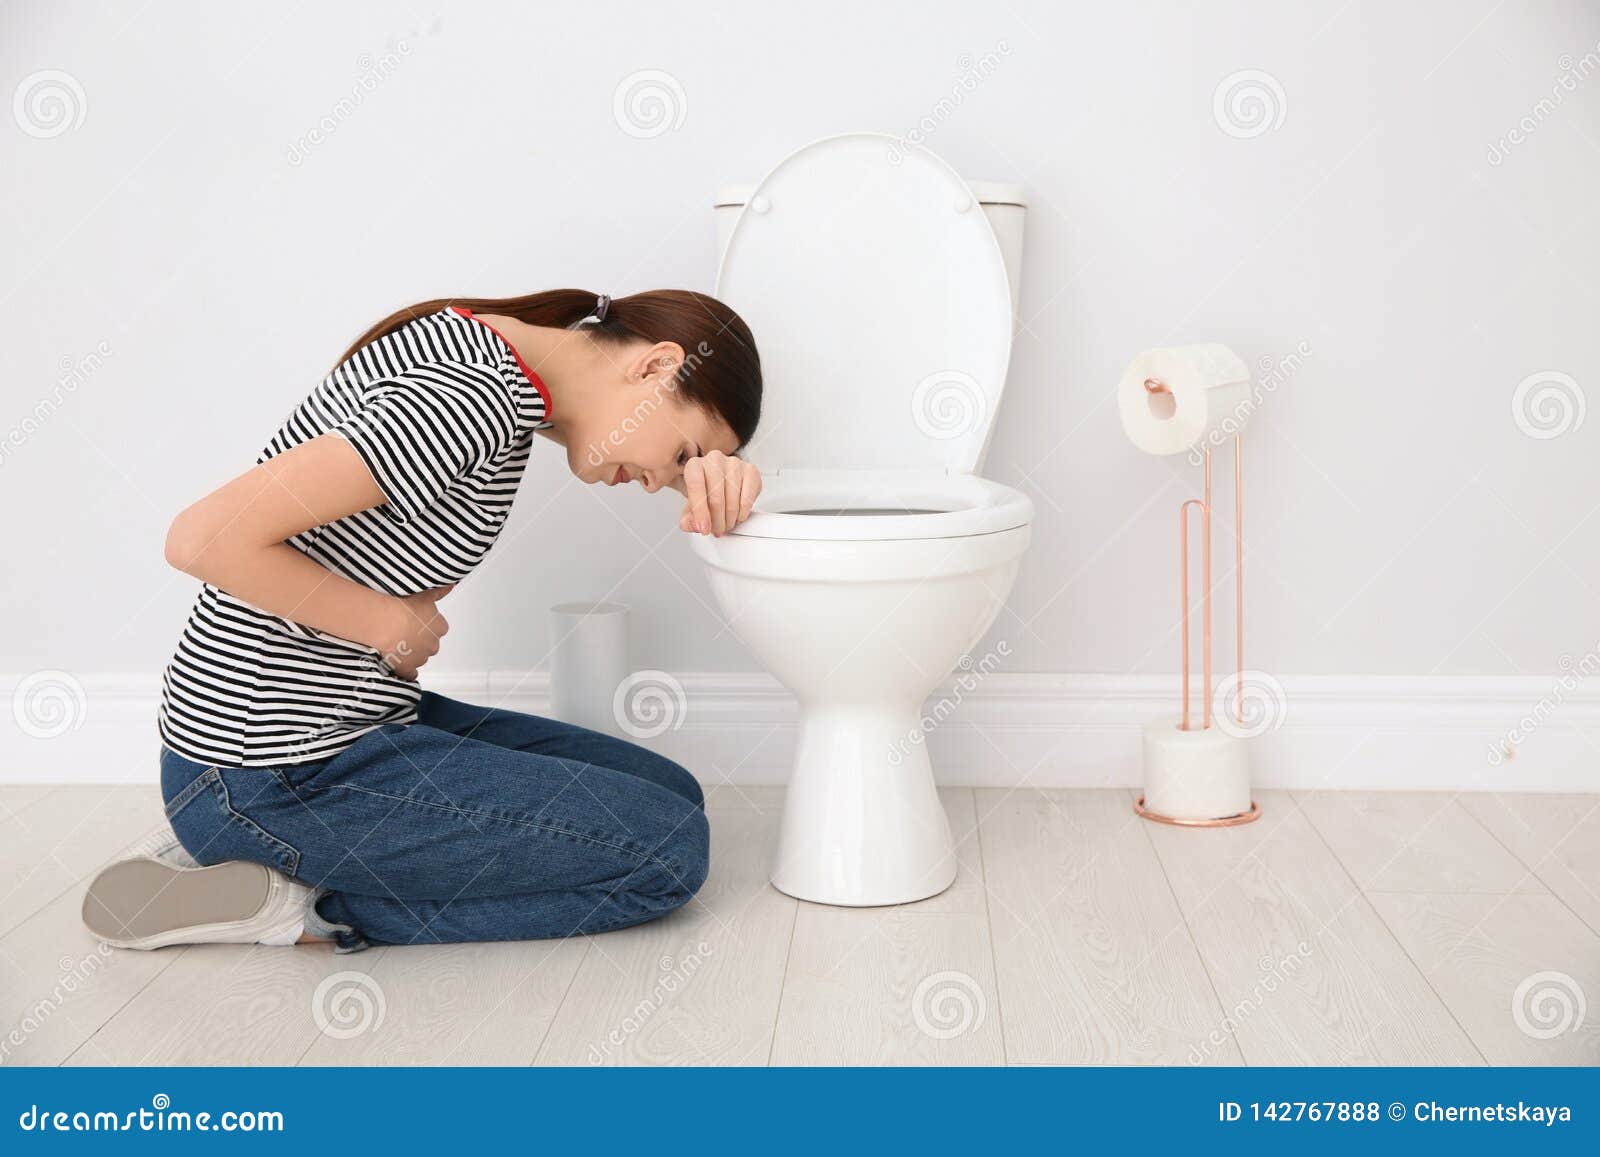 young woman suffering from nausea at toilet bowl indoors